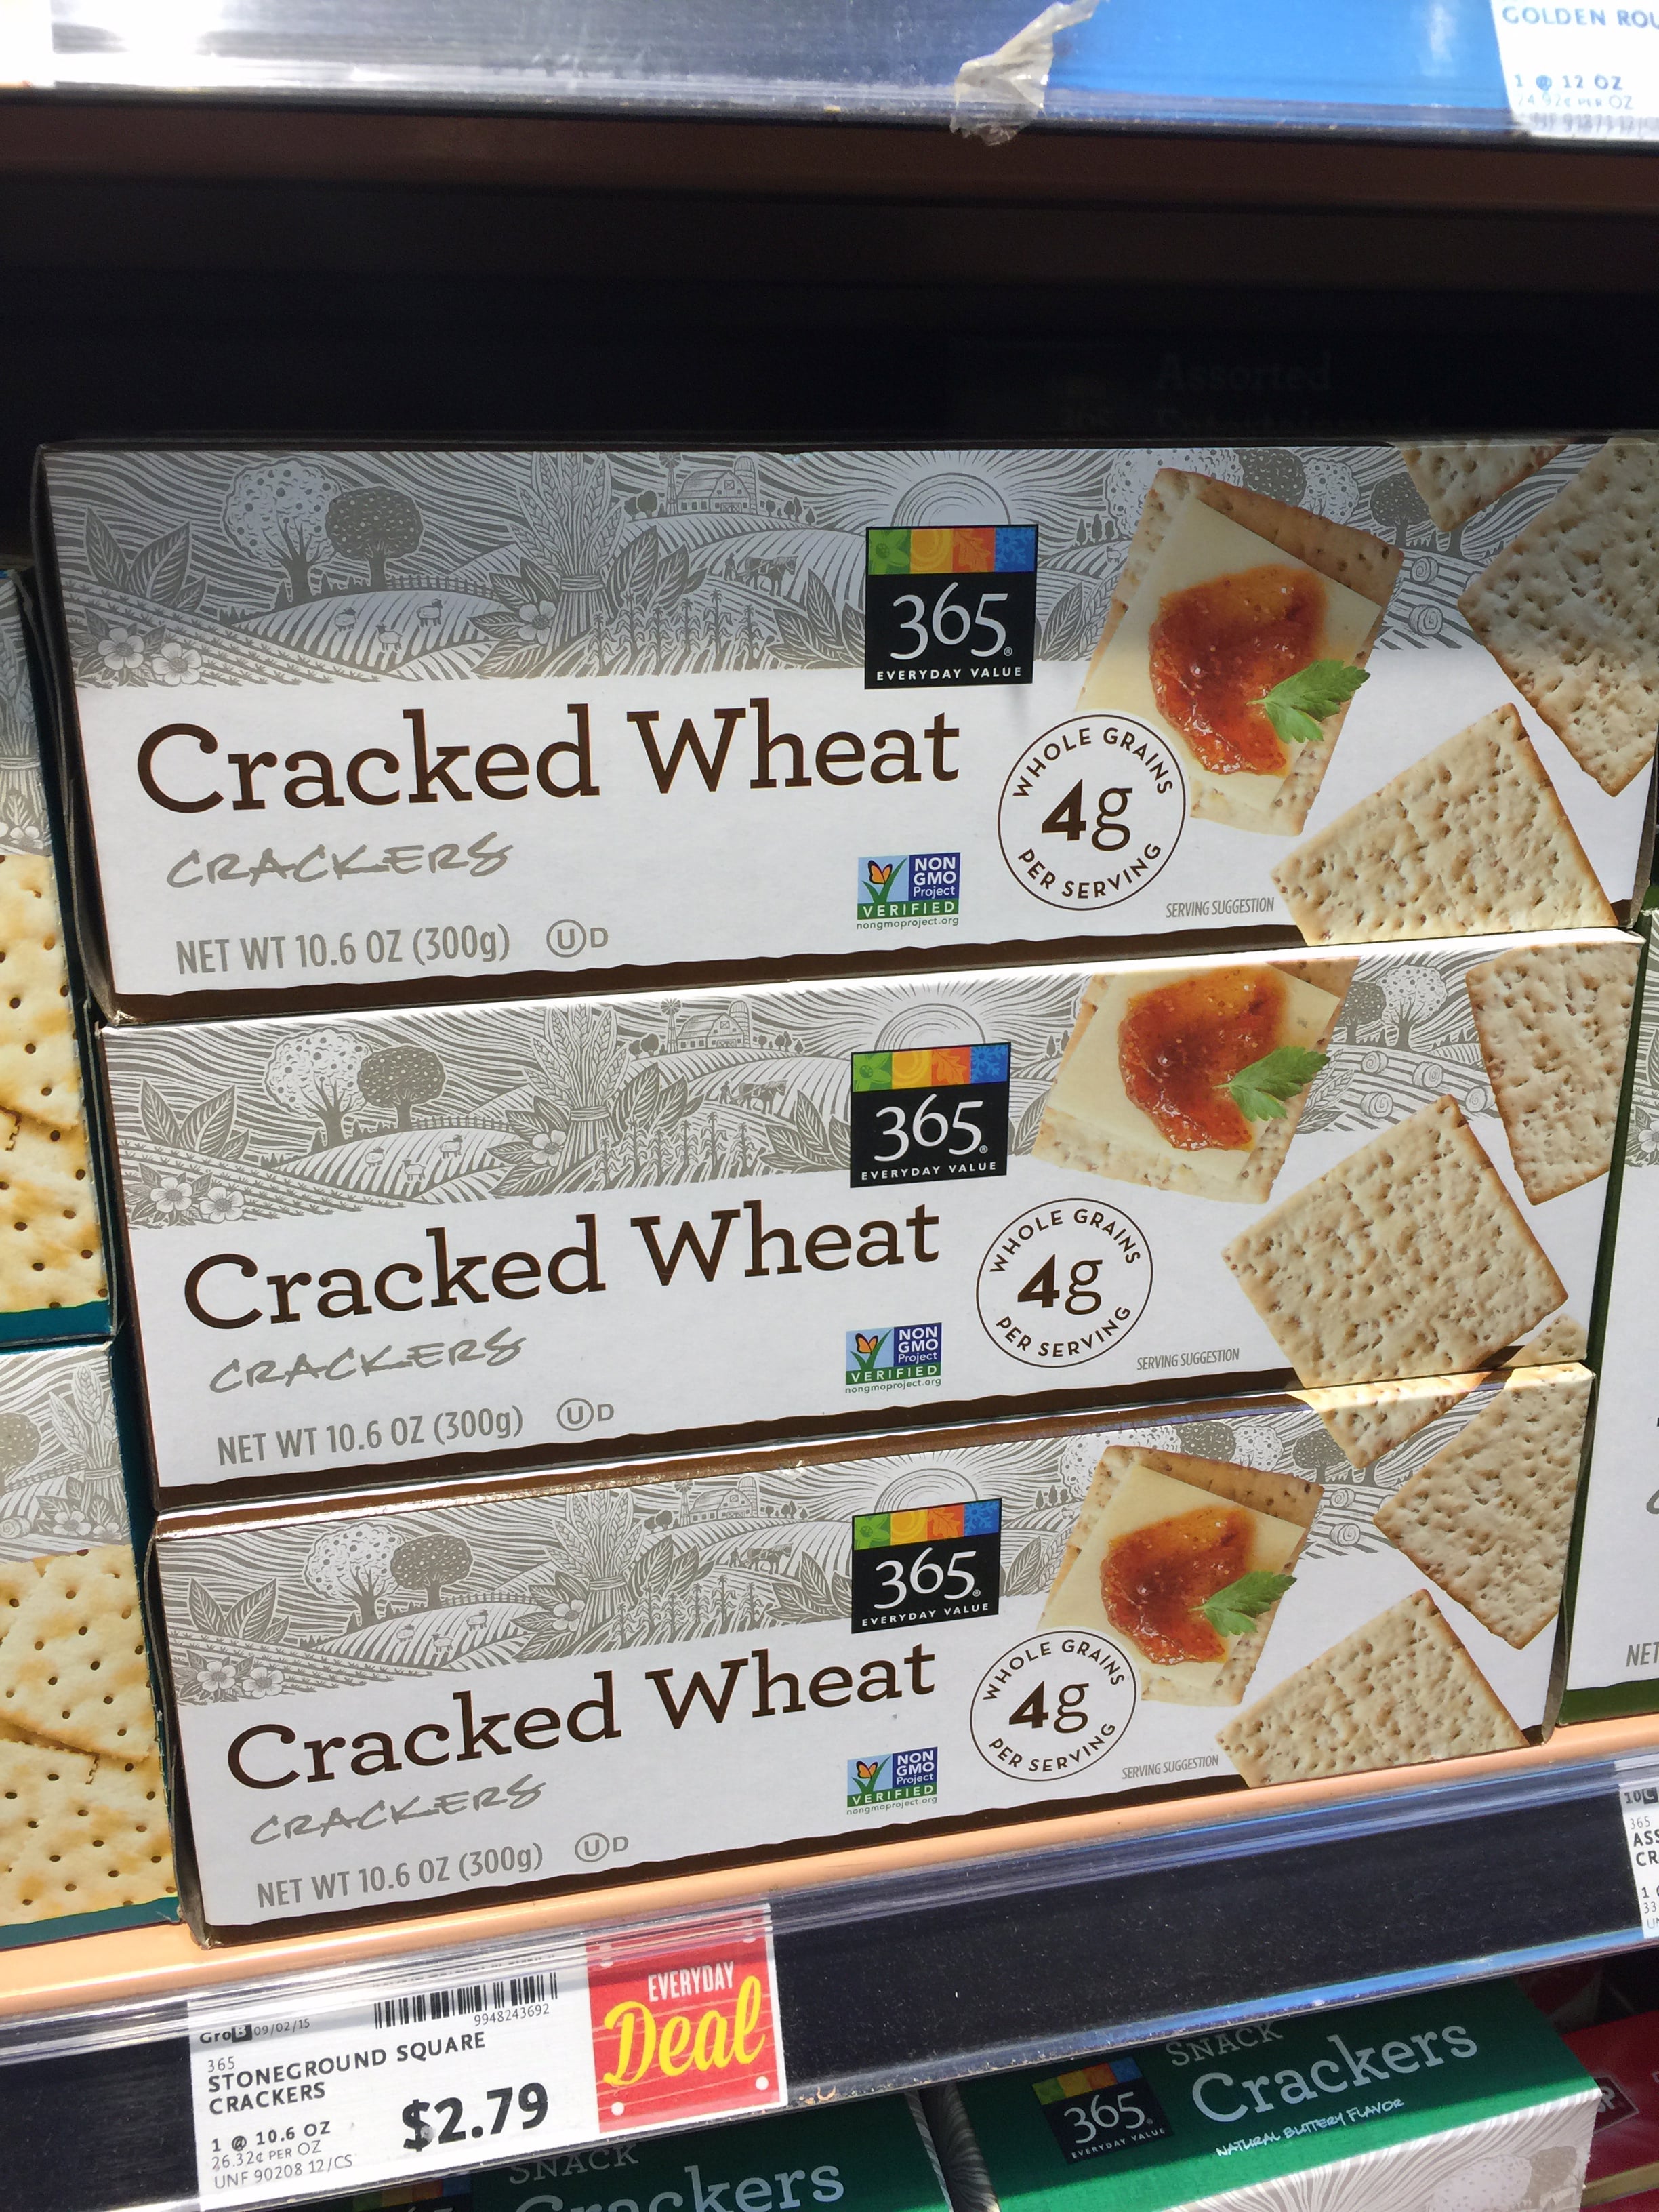 Whole Foods Market: Find Your Favorite Products